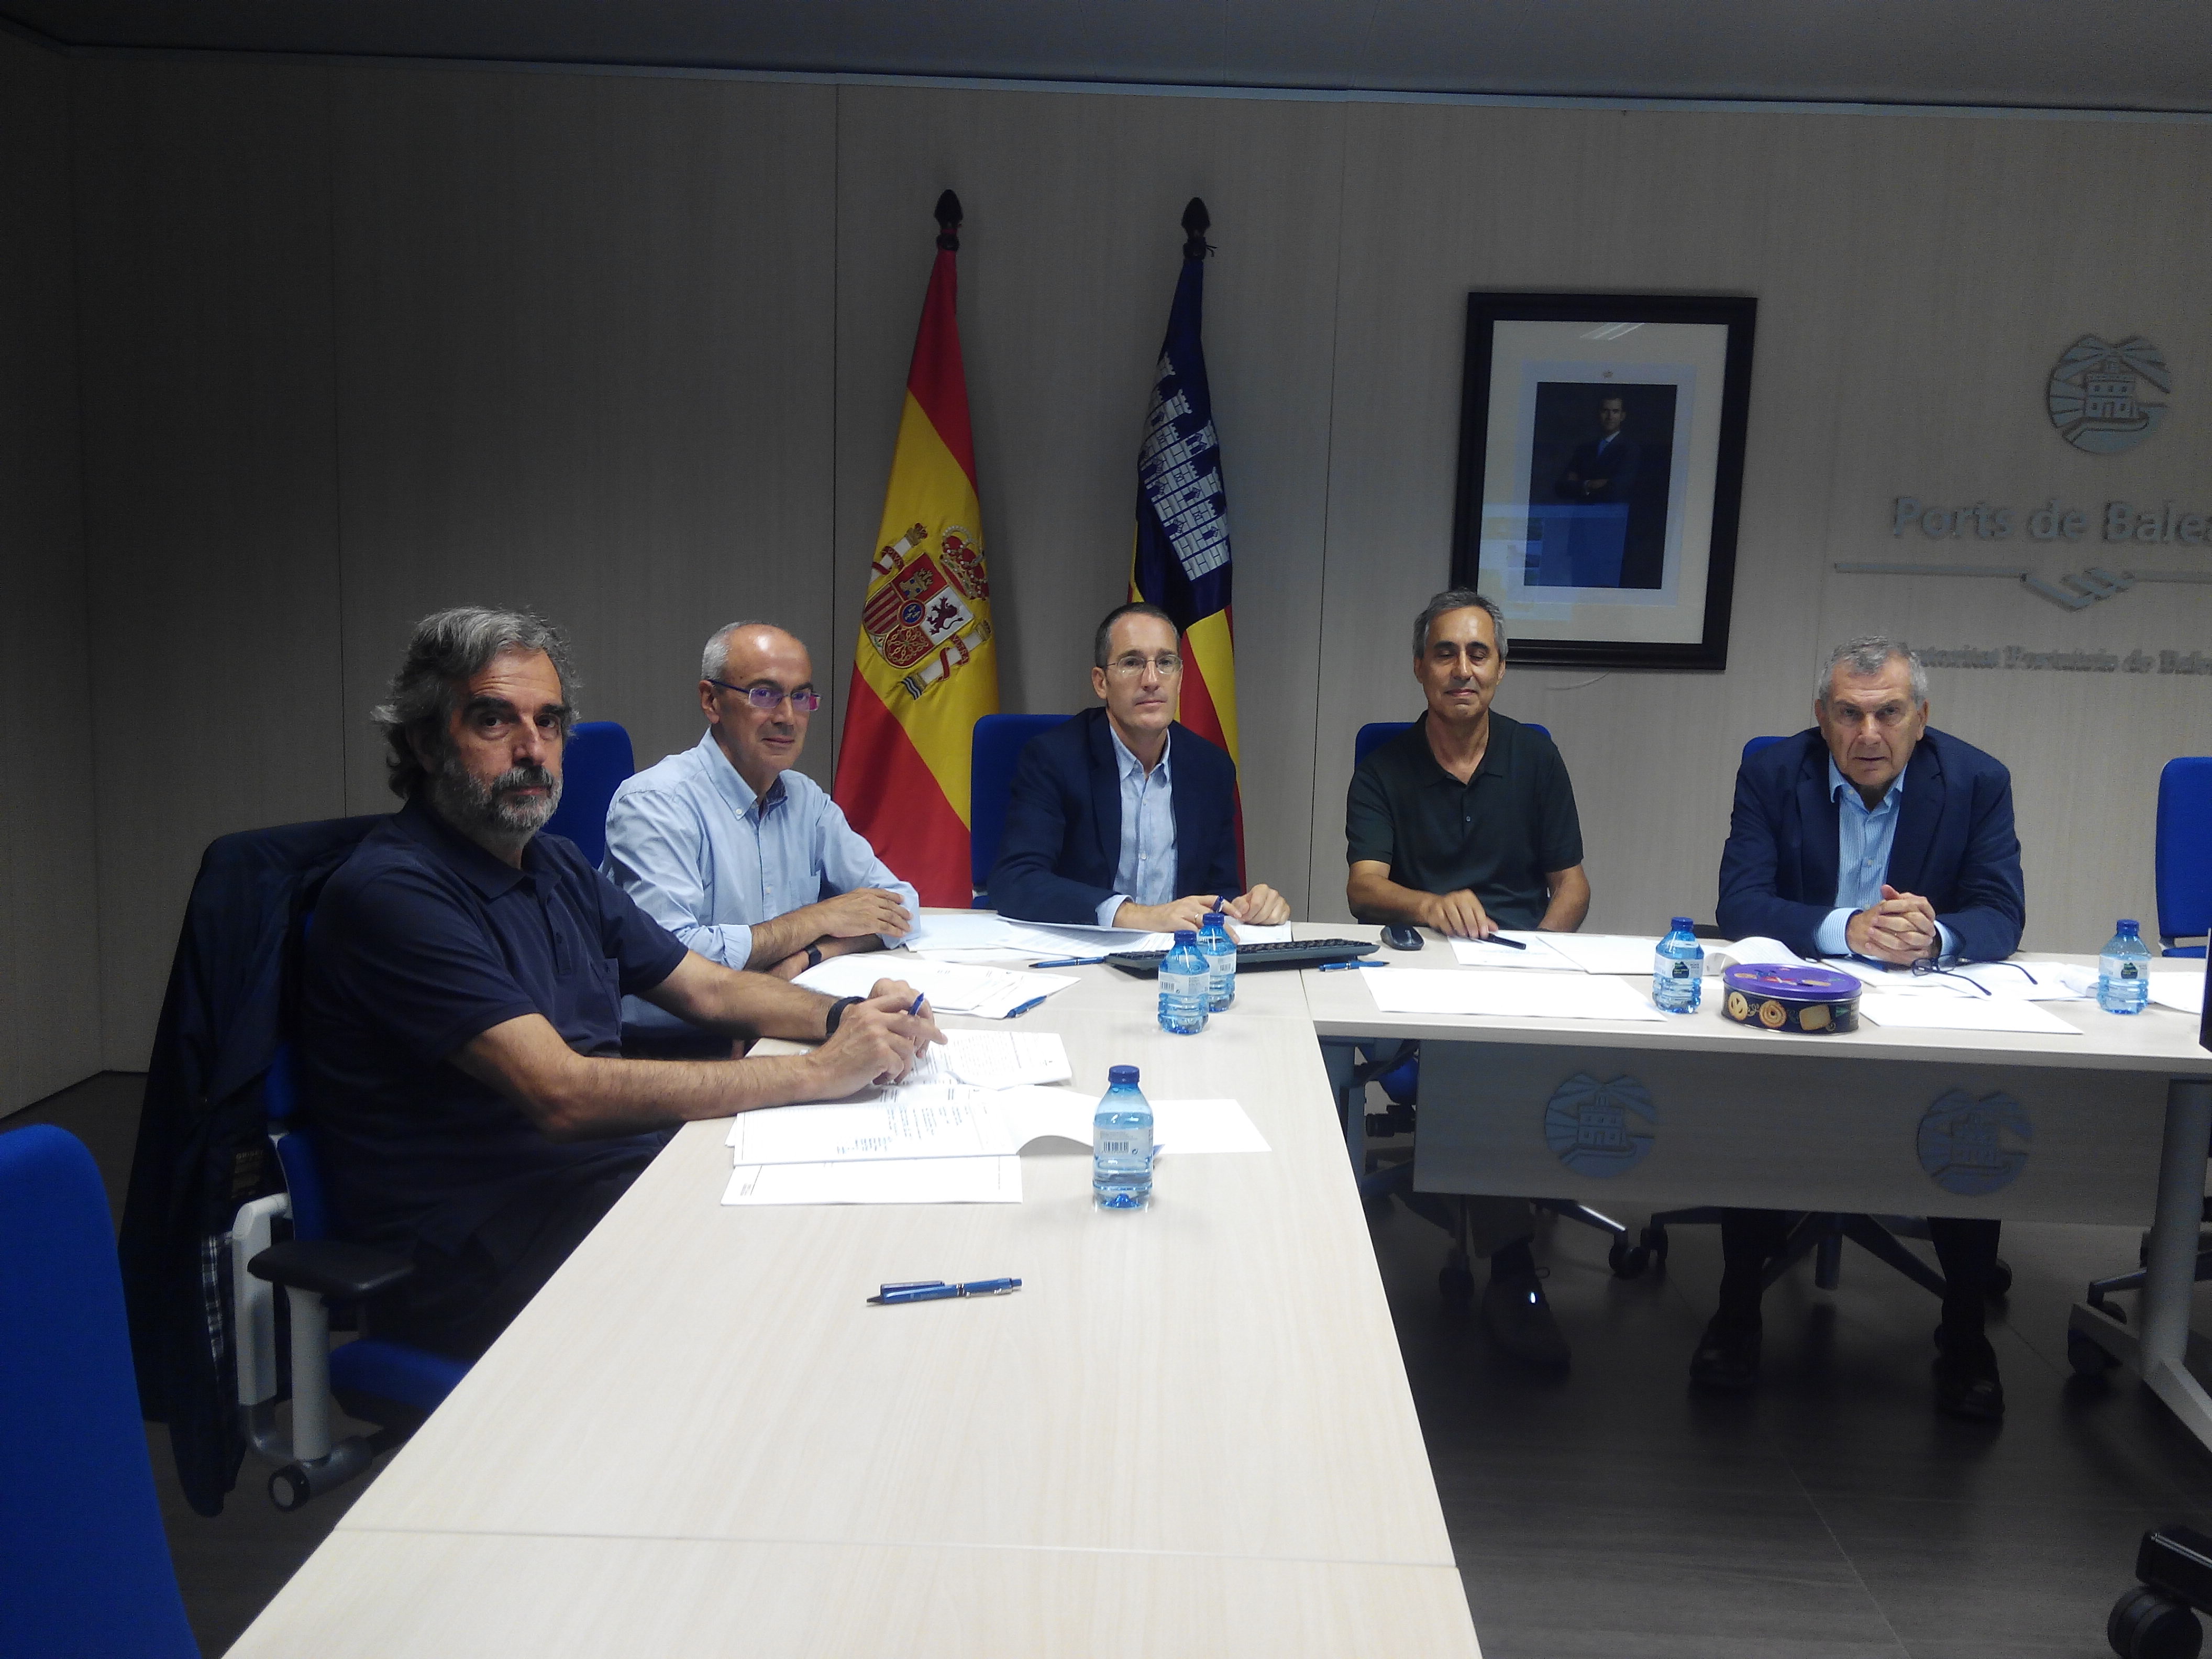 A COMMITTEE OF EXPERTS ASSESSES THE SEVEN PROPOSALS SUBMITTED FOR THE REFURBISHMENT OF THE SEAFRONT PROMENADE OF PALMA